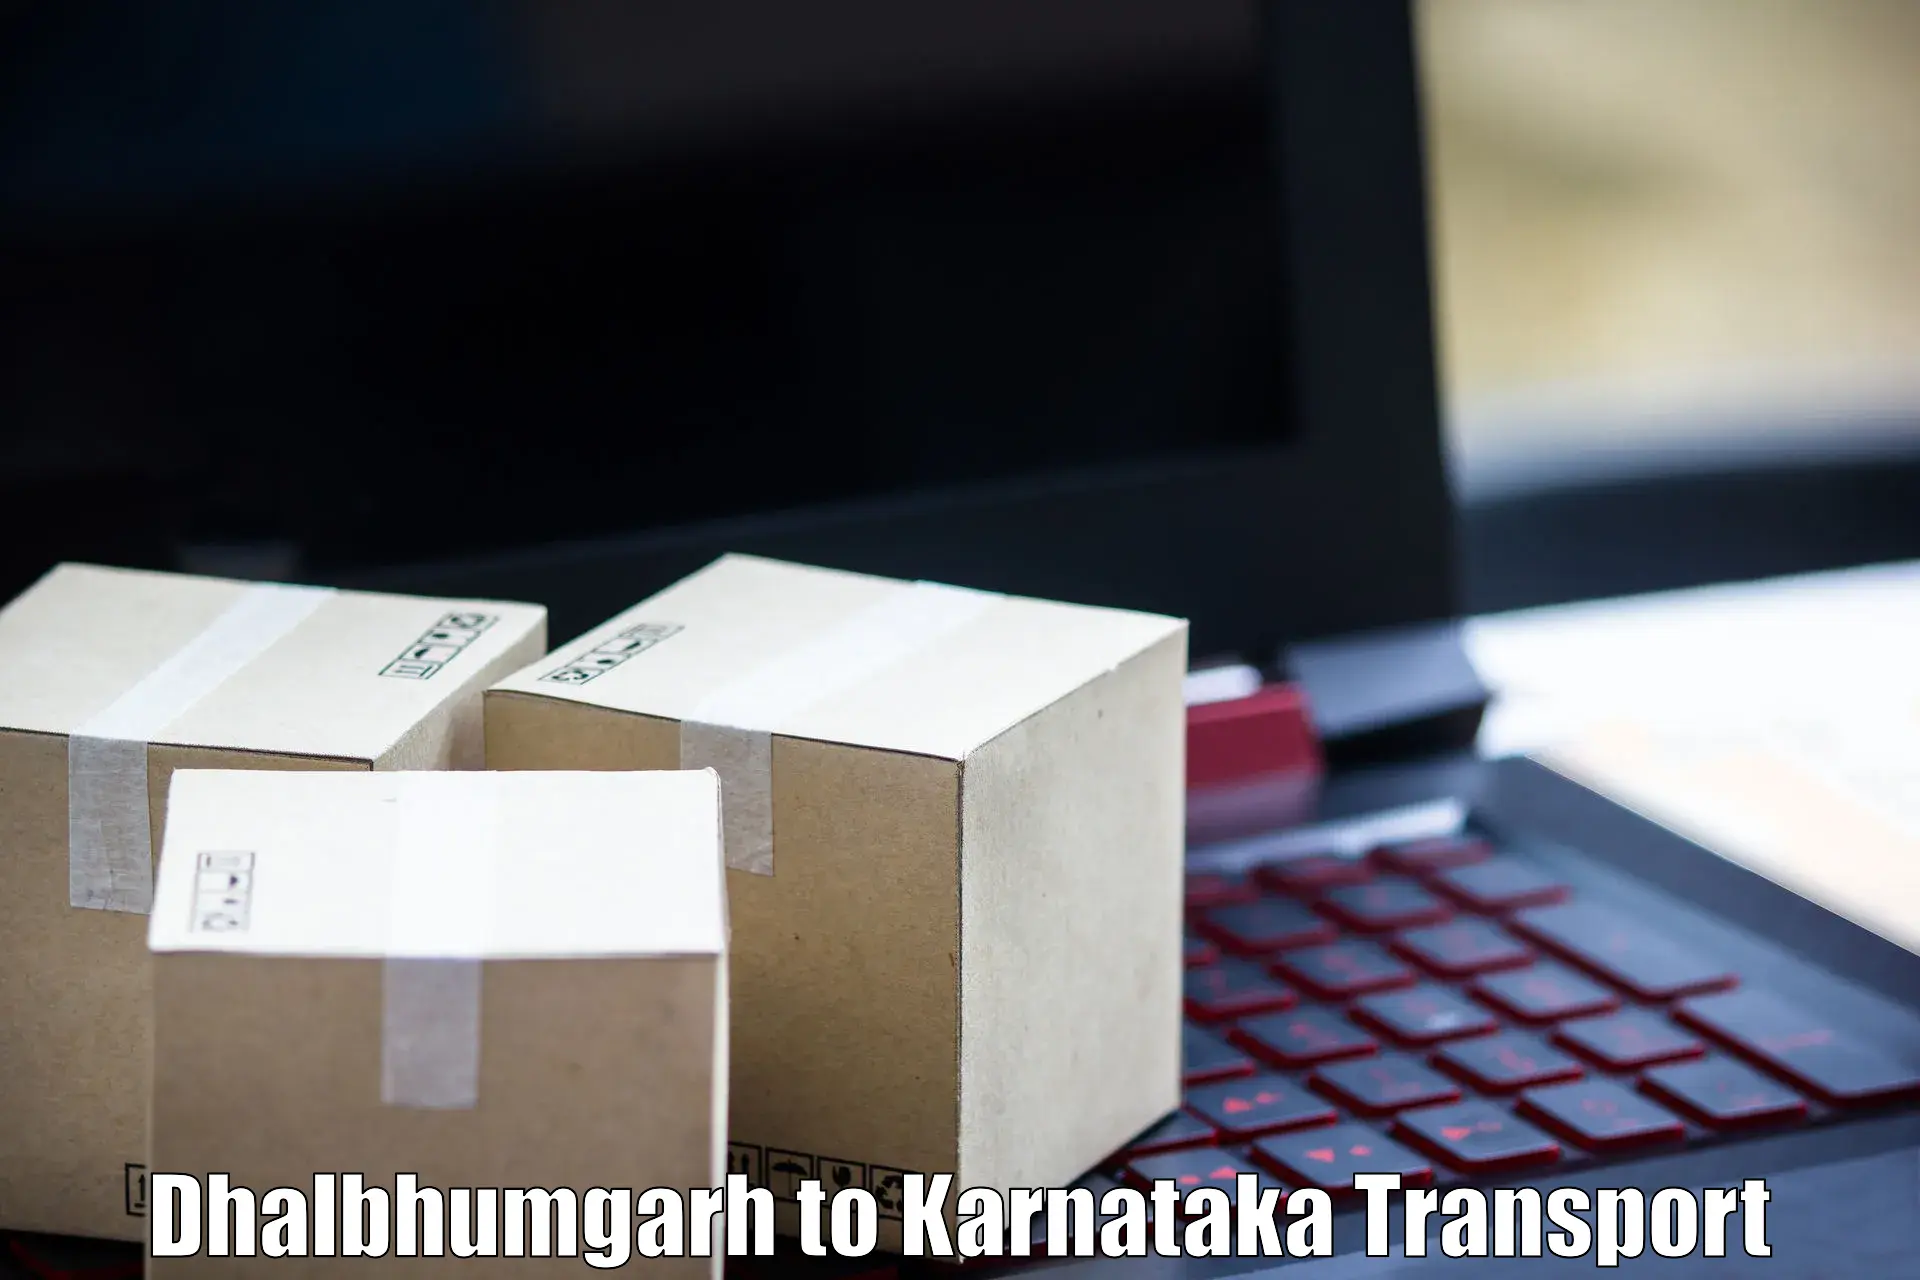 Air freight transport services Dhalbhumgarh to Bangalore